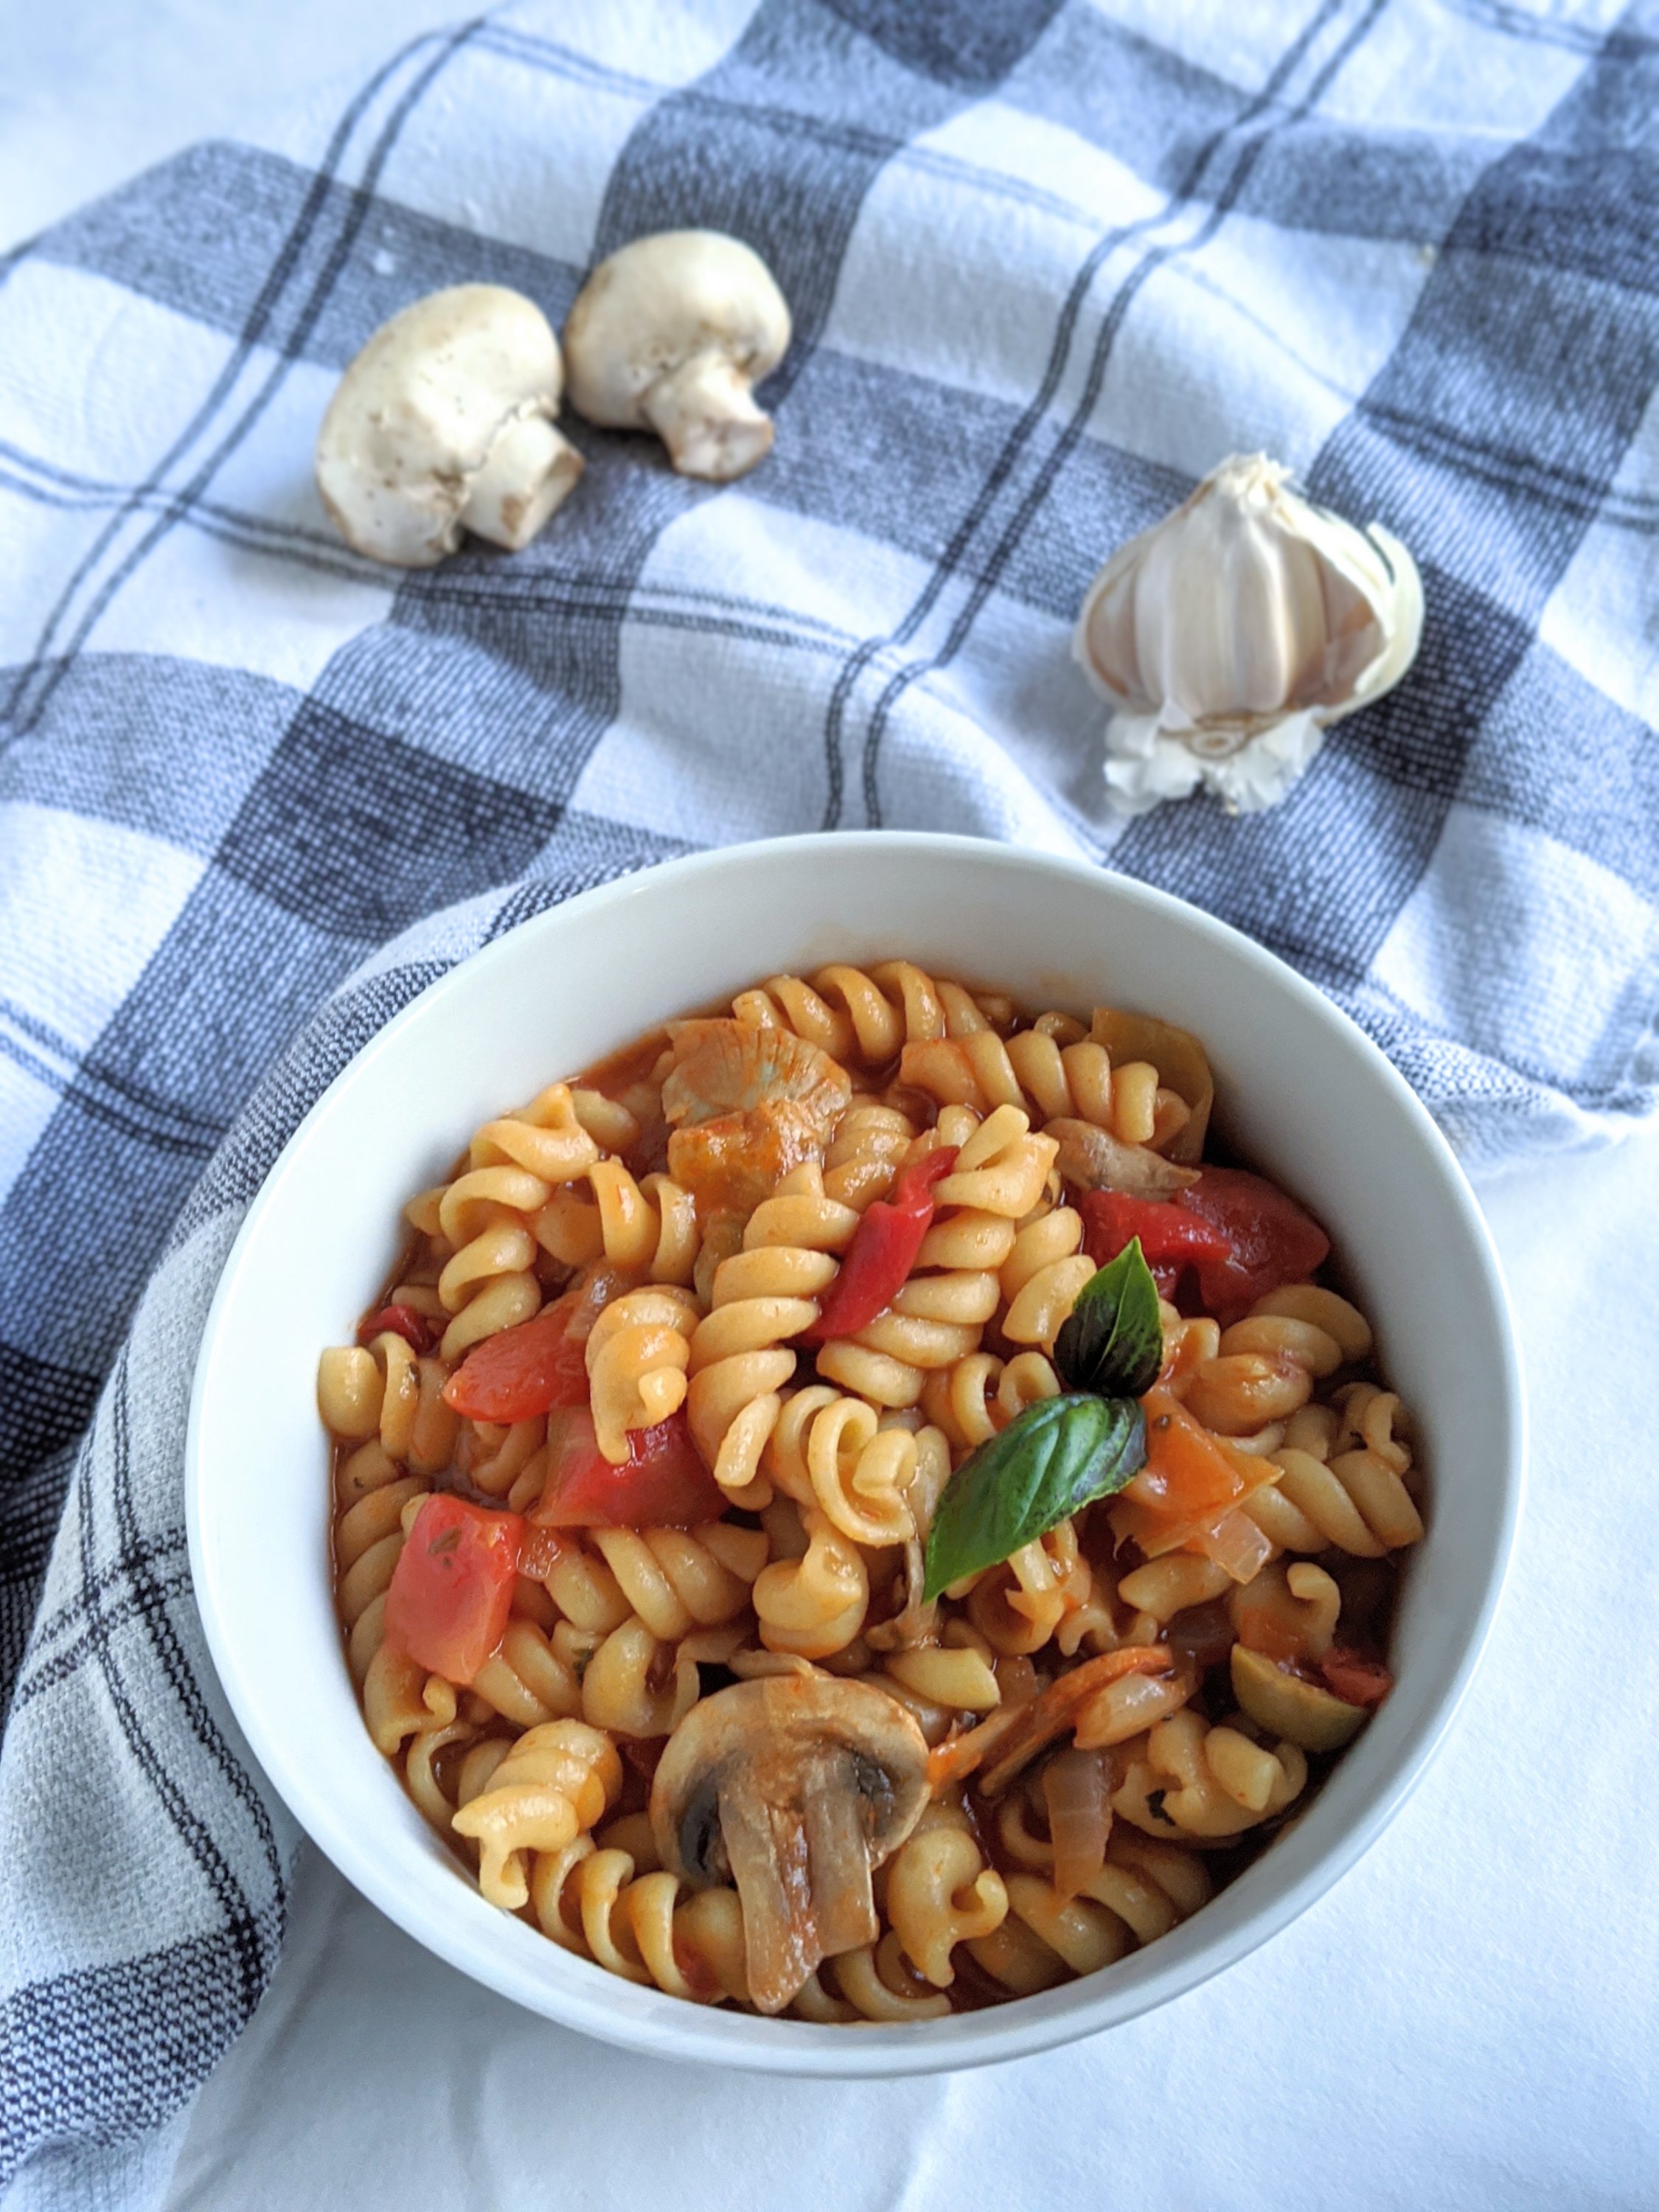 dairy free mediterranean recipes one pot pastas with roasted red peppers Kalamata olives mushroom's marinated artichoke hearts and basil